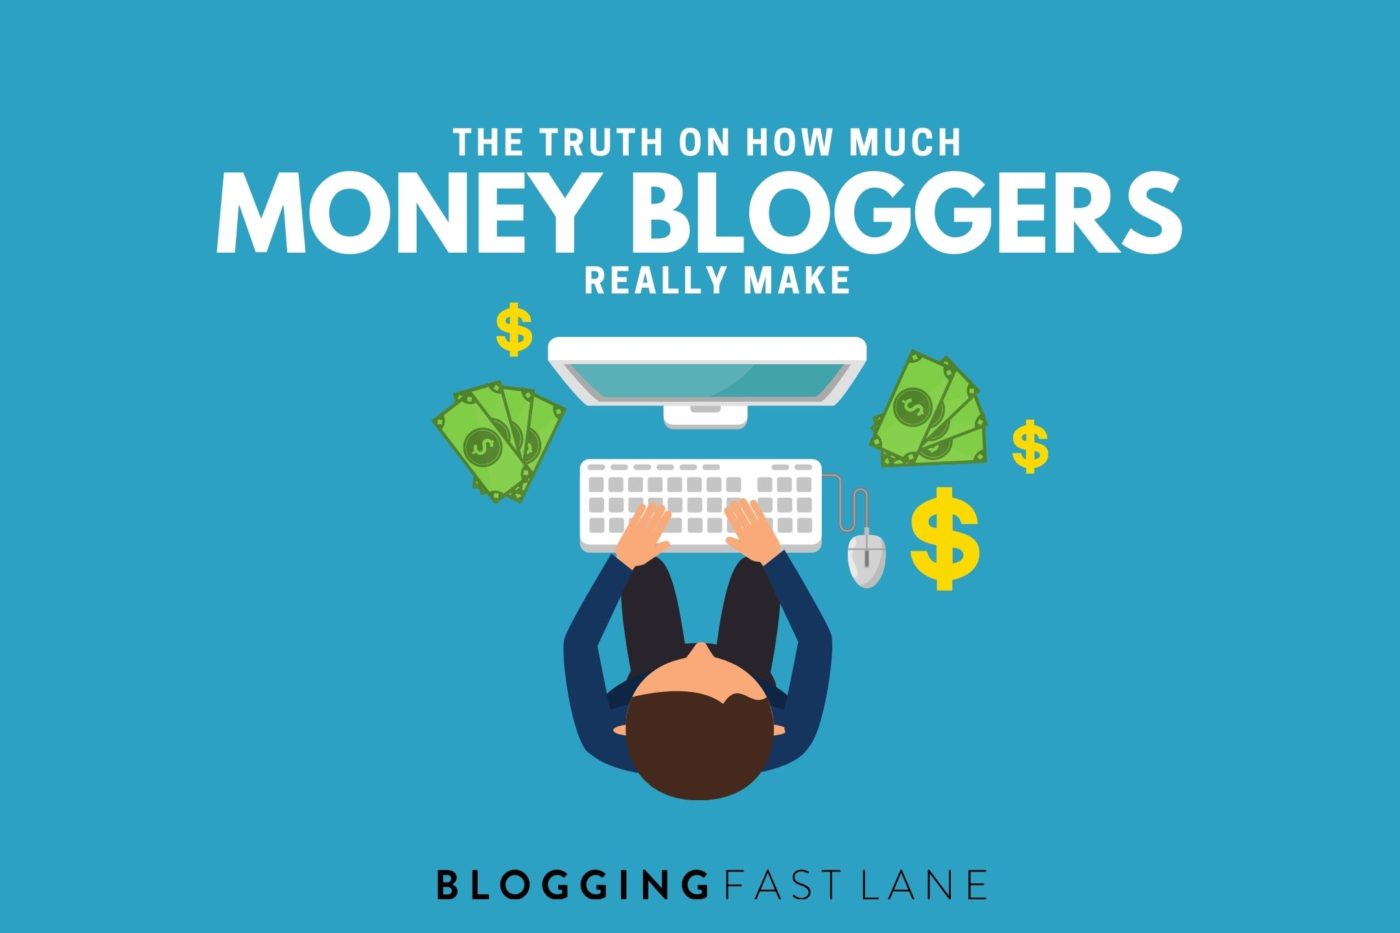 How much bloggers make